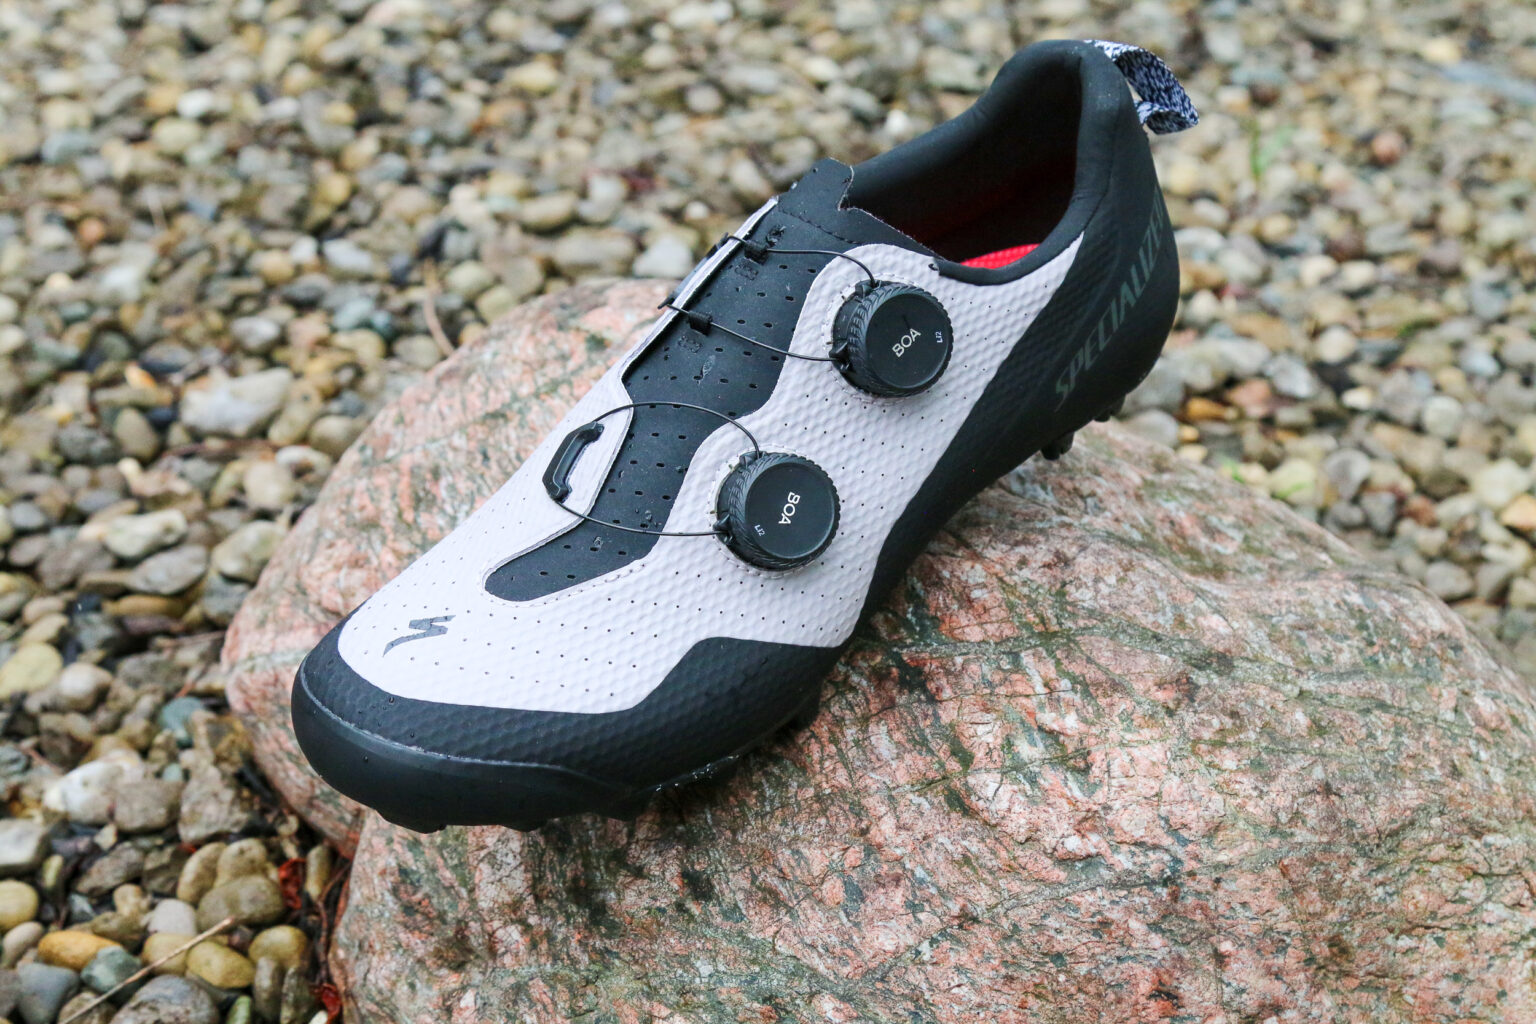 Specialized Recon gravel shoes